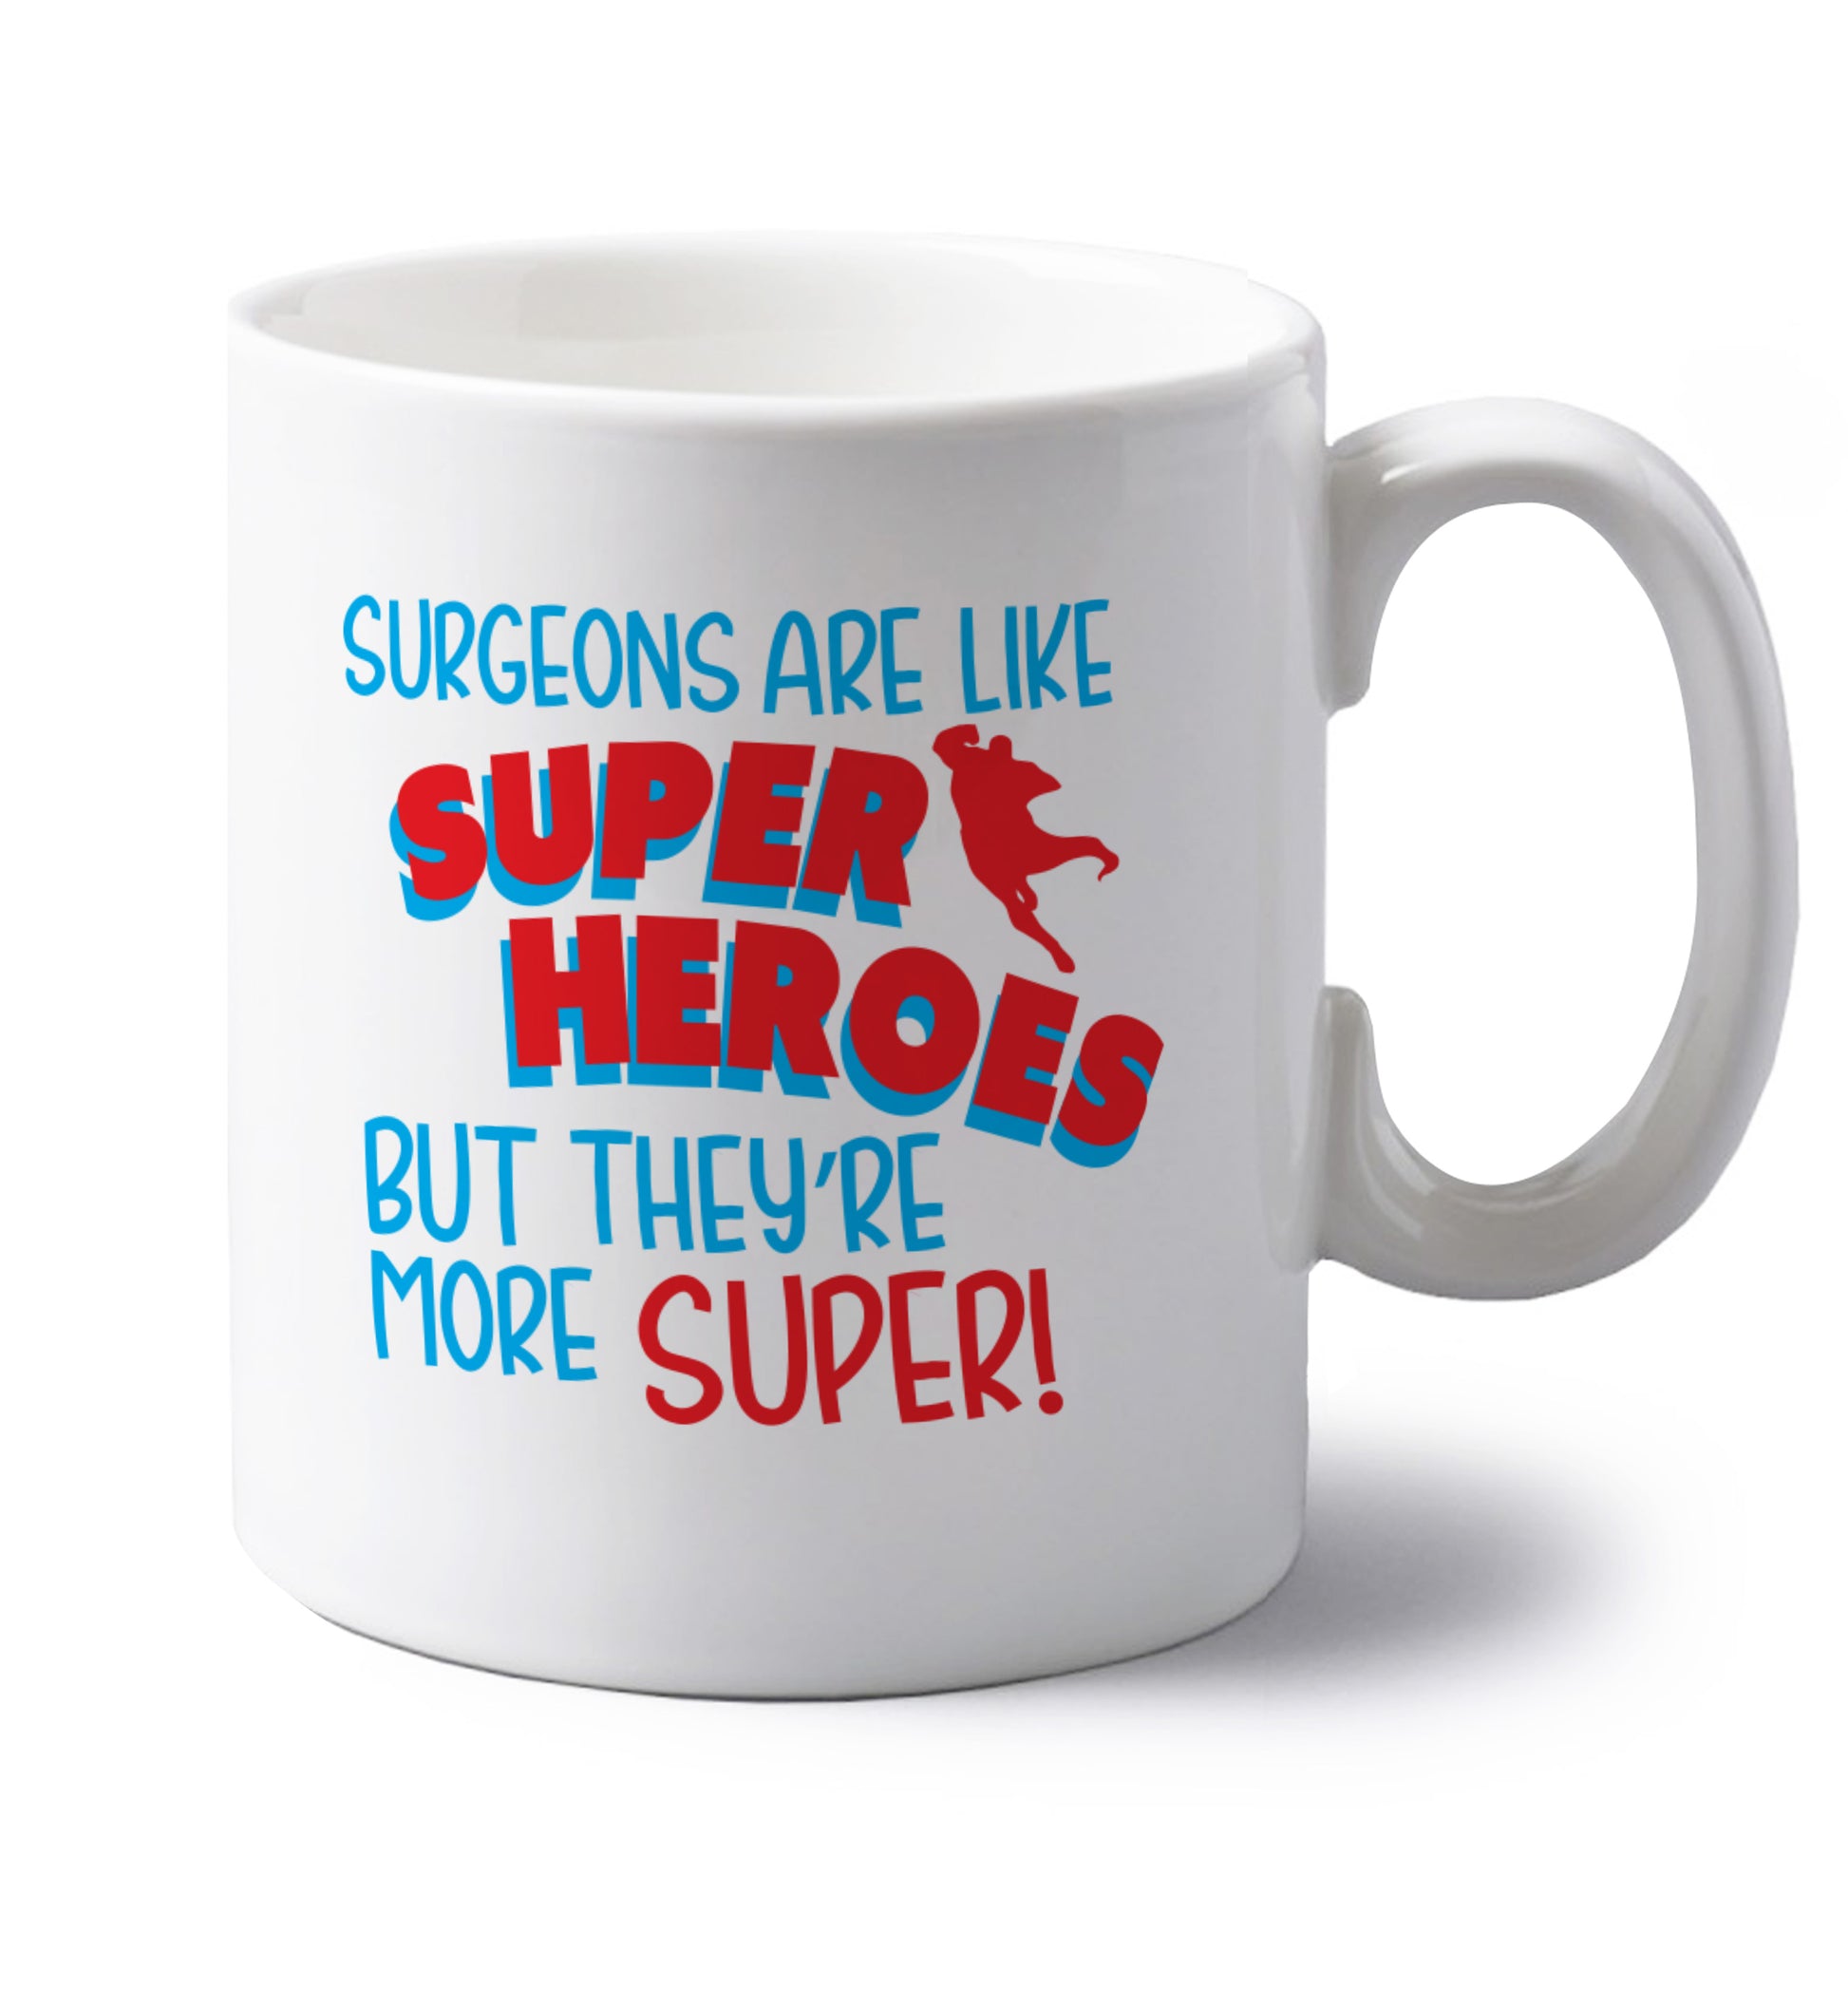 Surgeons are like superheros but they're more super left handed white ceramic mug 